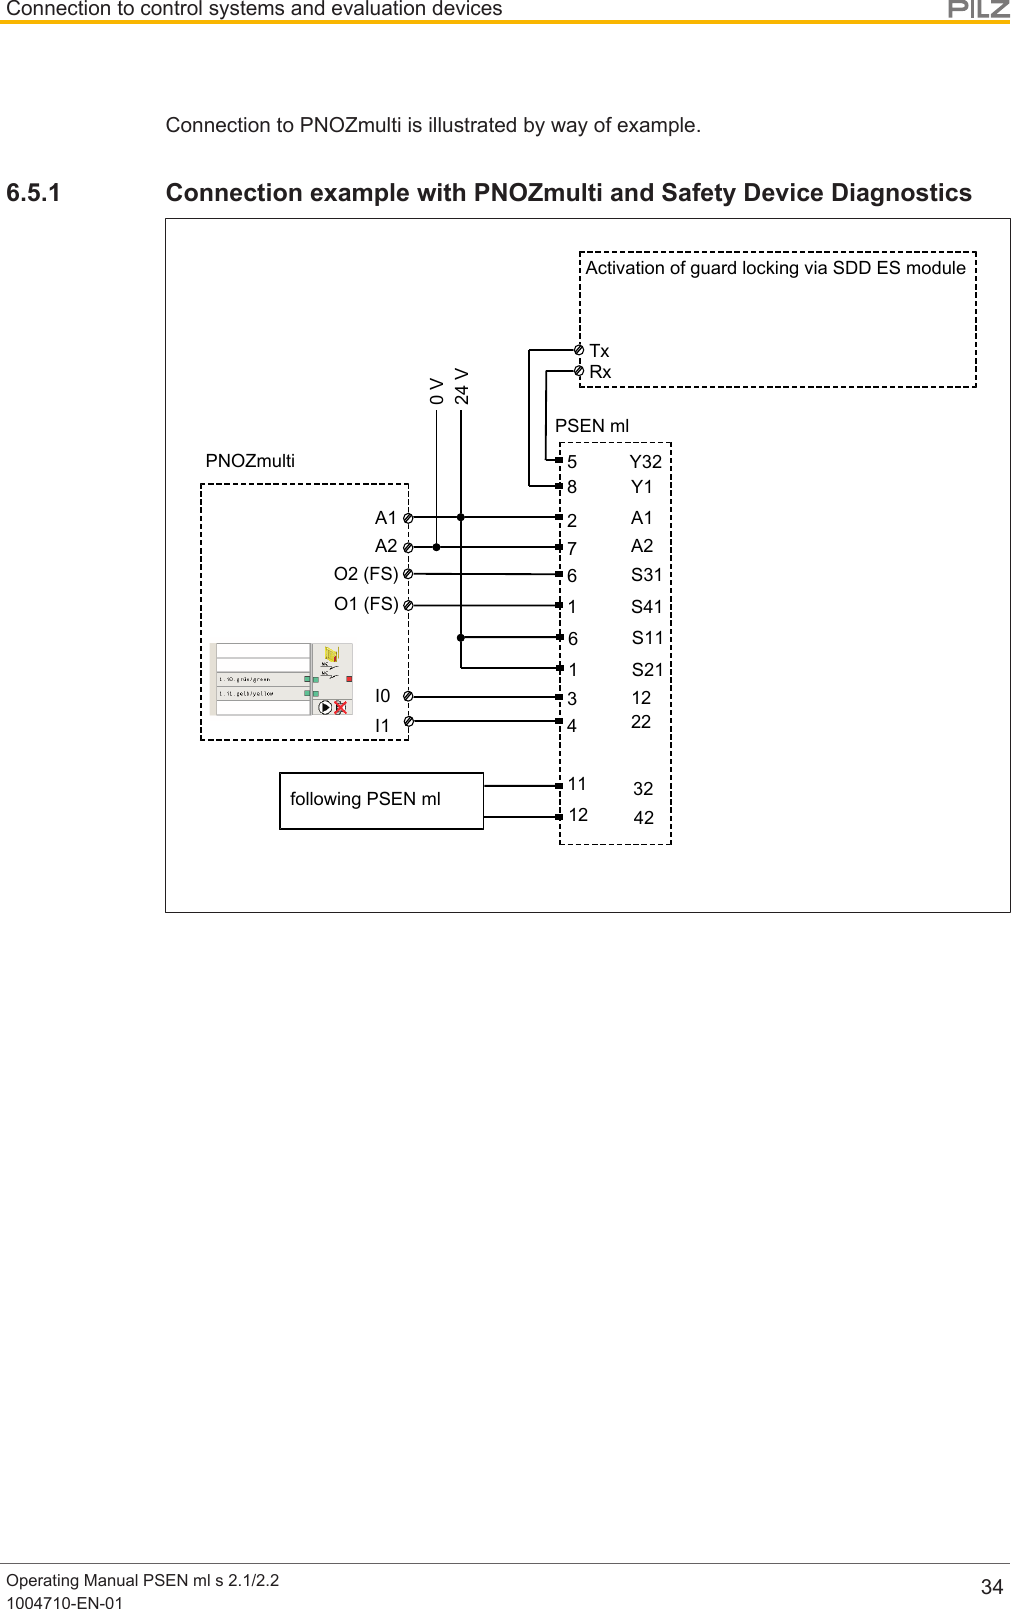 Connection to control systems and evaluation devicesOperating Manual PSEN ml s 2.1/2.21004710-EN-01 34Connection to PNOZmulti is illustrated by way of example.6.5.1 Connection example with PNOZmulti and Safety Device DiagnosticsA1A2I0I1A1A2Y32Y1122212345678PNOZmultiPSEN ml0 V24 VS31S41O2 (FS)O1 (FS)Rx16S11S21Tx32421112Activation of guard locking via SDD ES modulefollowing PSEN ml